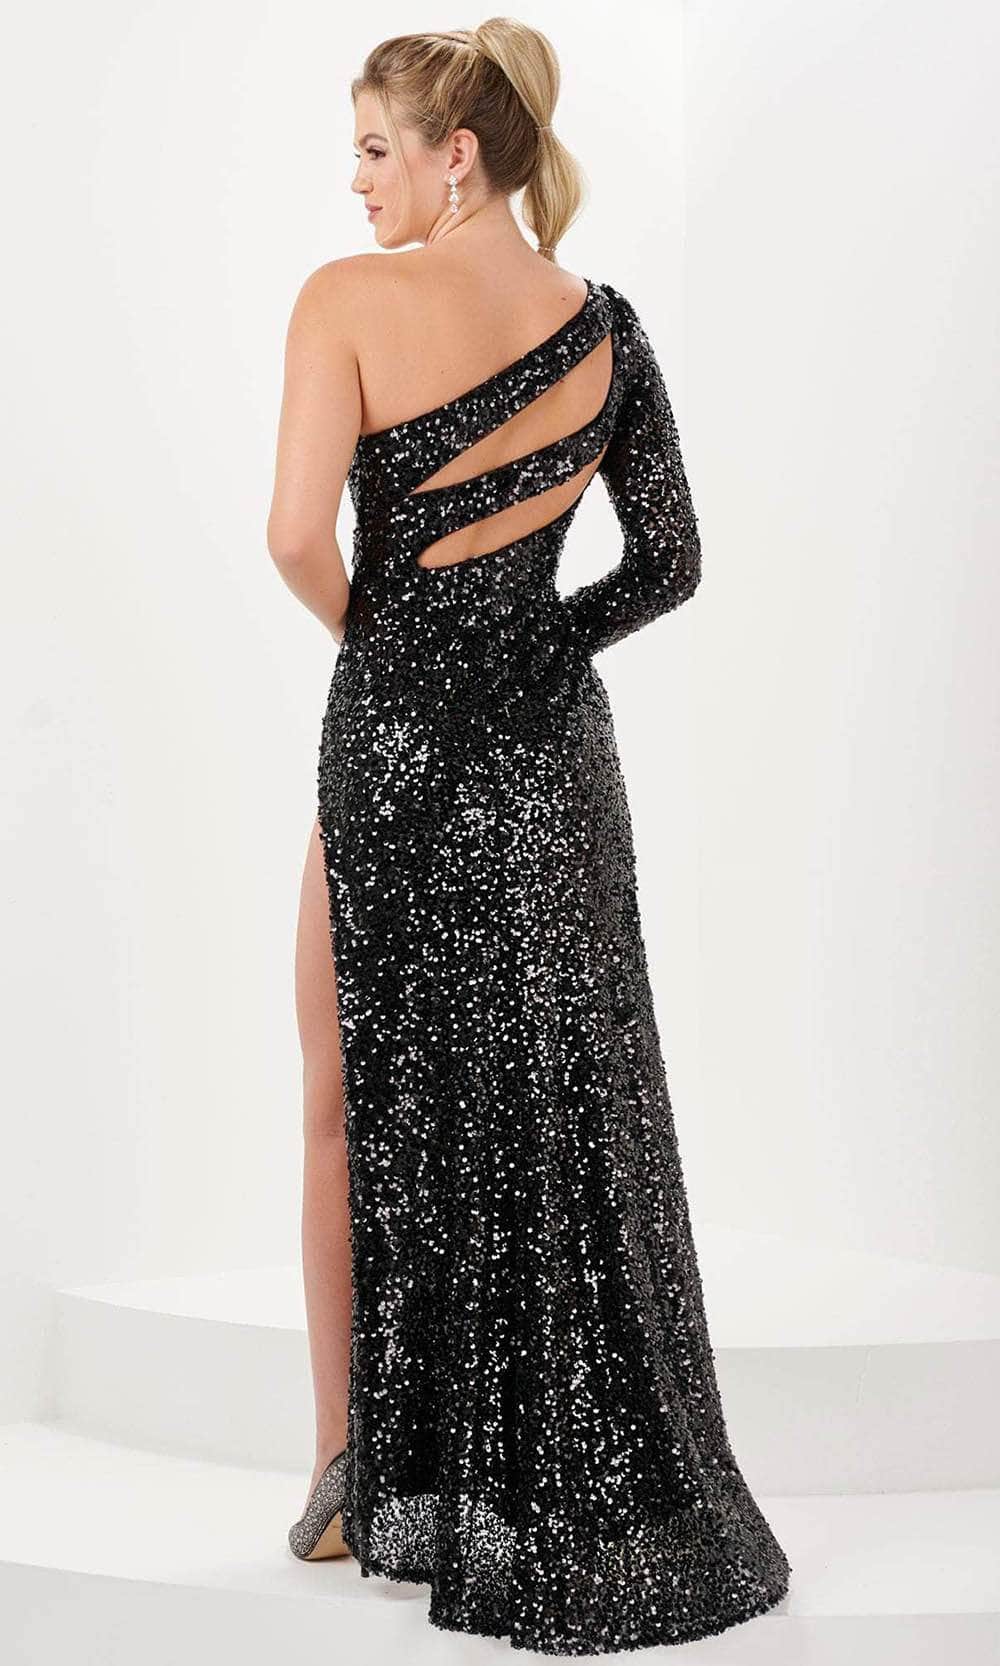 Tiffany Designs 16053 - Cutout Sequin Evening Gown Special Occasion Dress